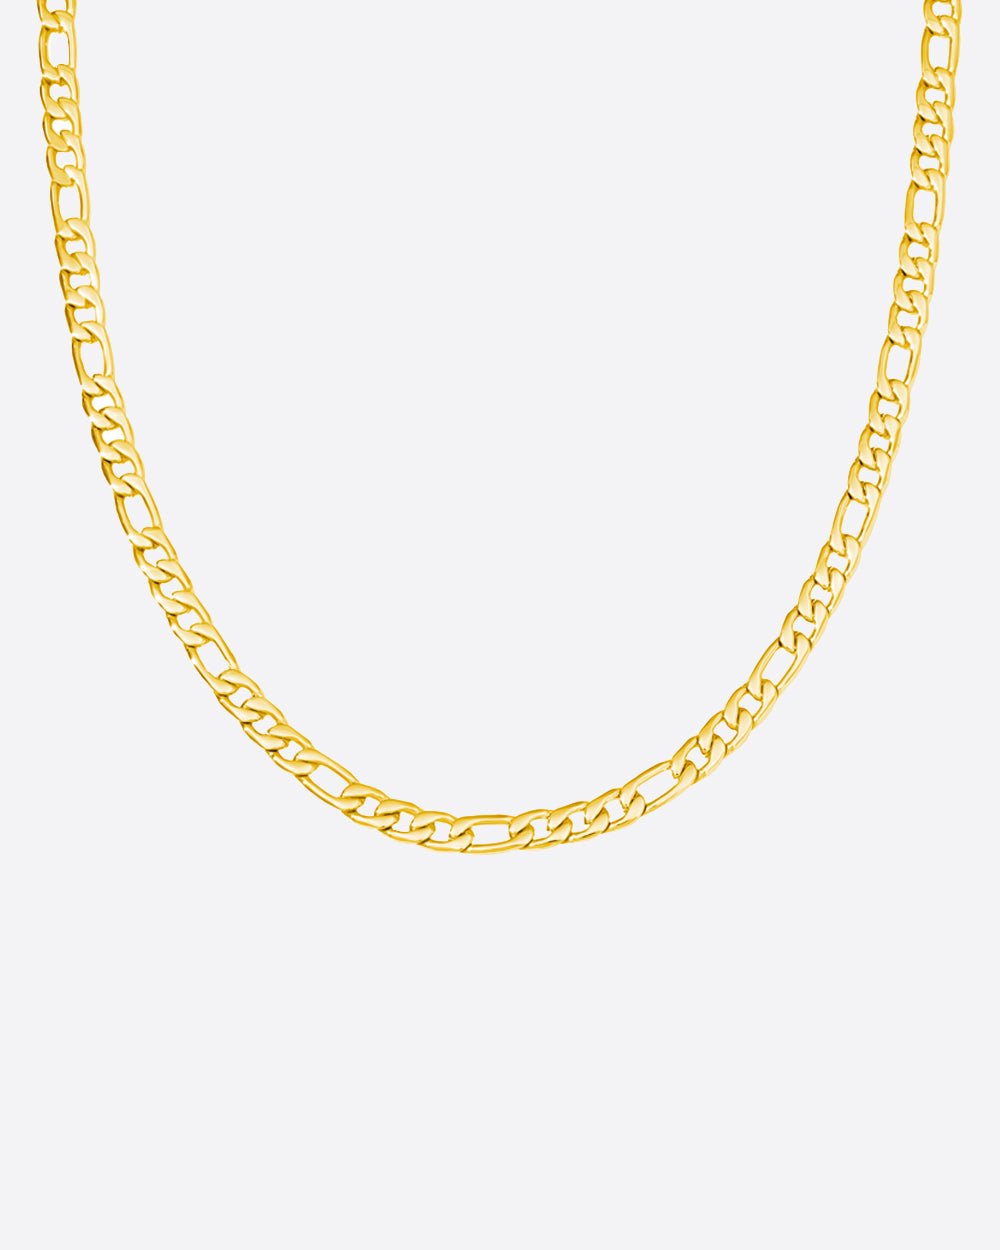 CLEAN FIGARO CHAIN. - 5MM 18K GOLD